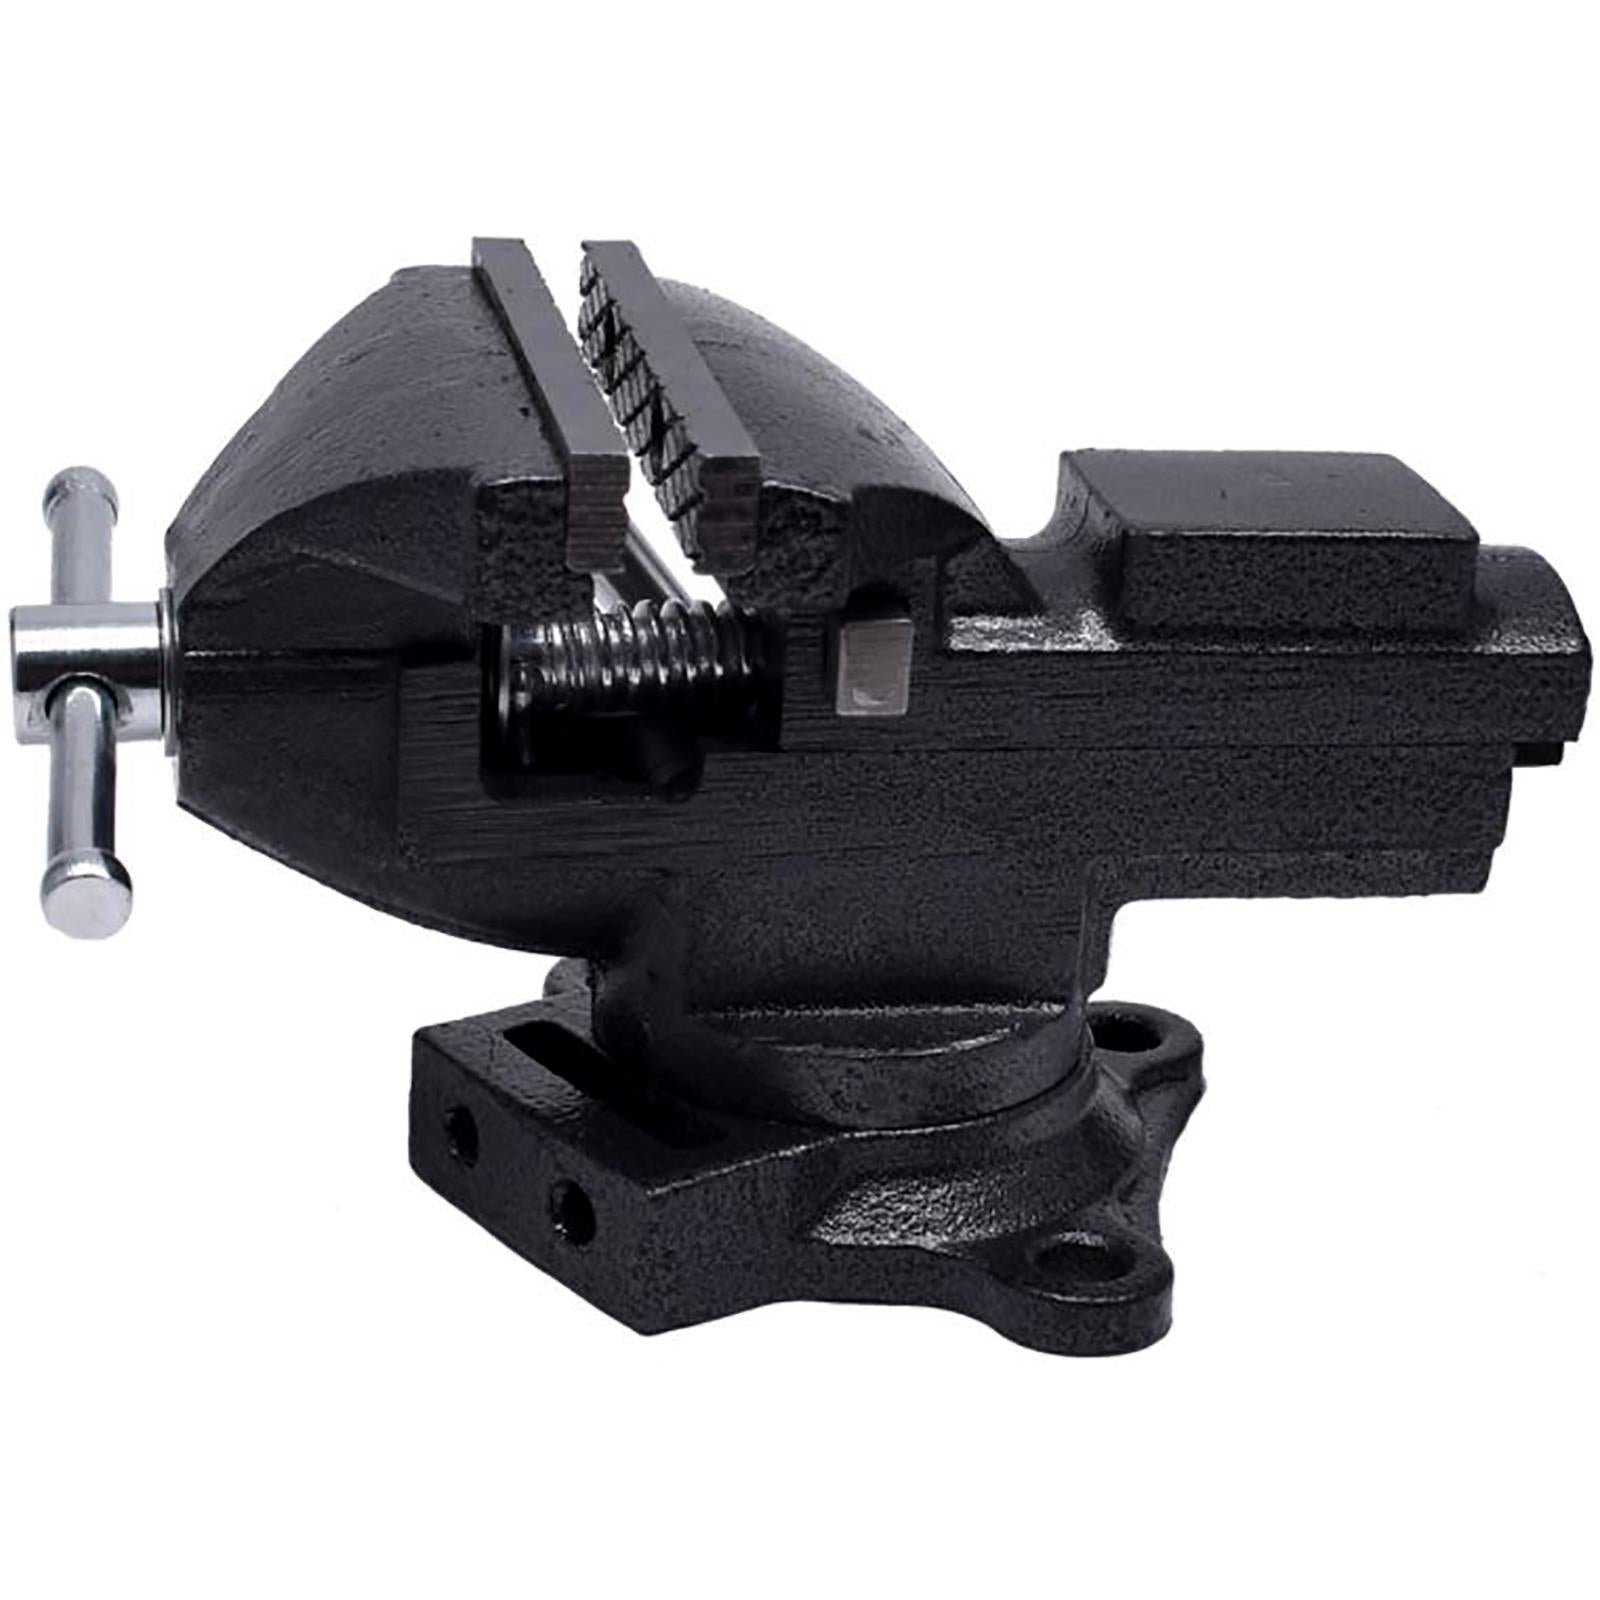 Amtech Swivel Vice With Quick Release Jaw And Anvil 85mm (3.3 ")